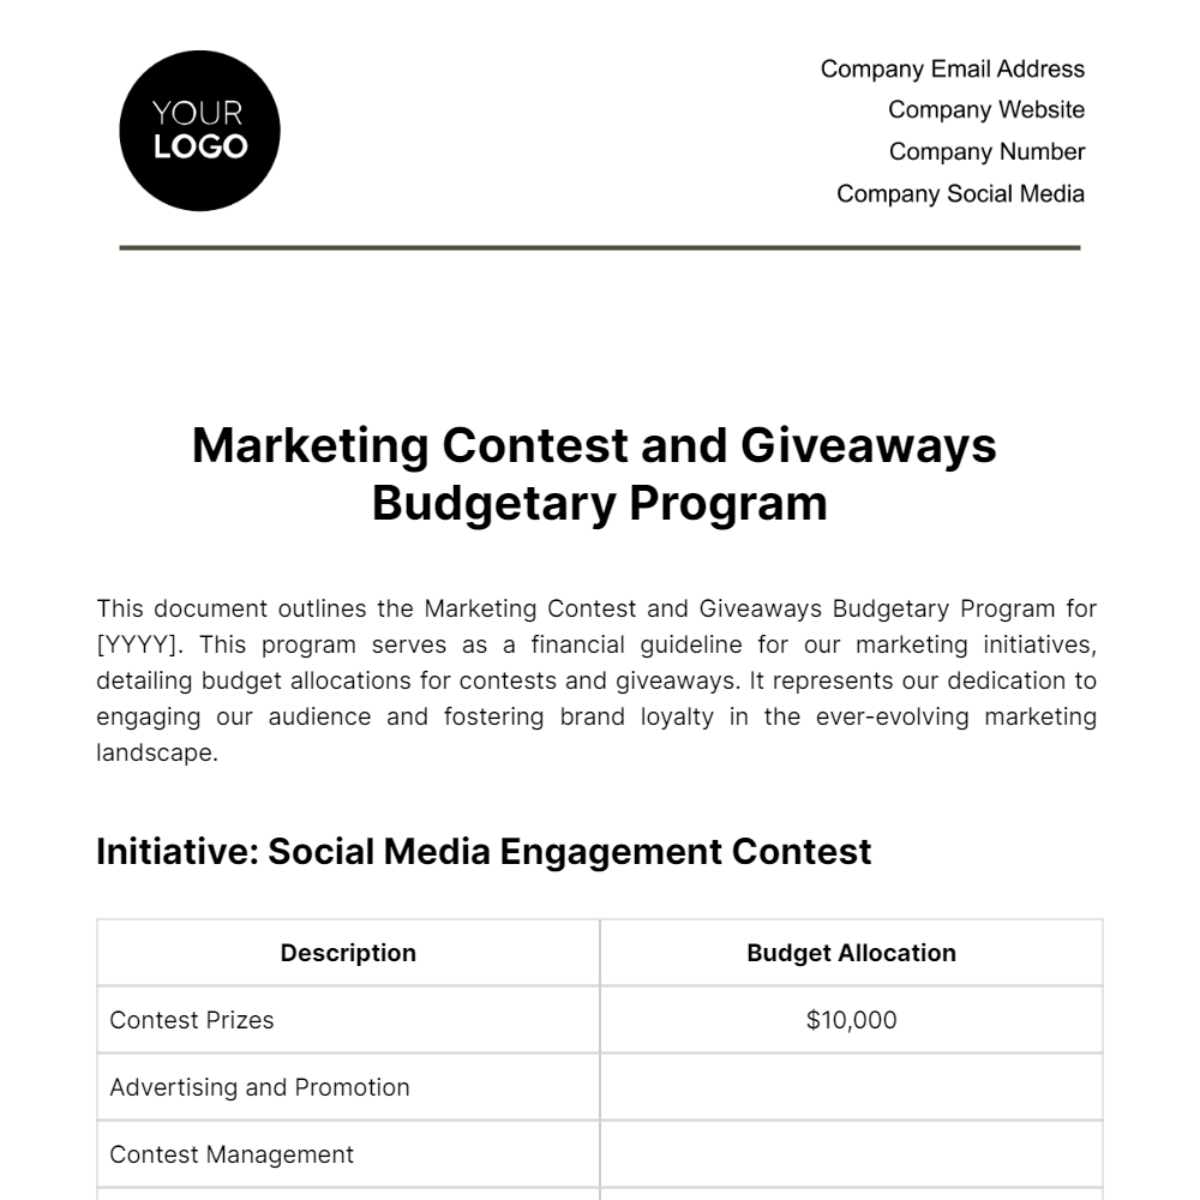 Free Marketing Contest and Giveaways Budgetary Program Template